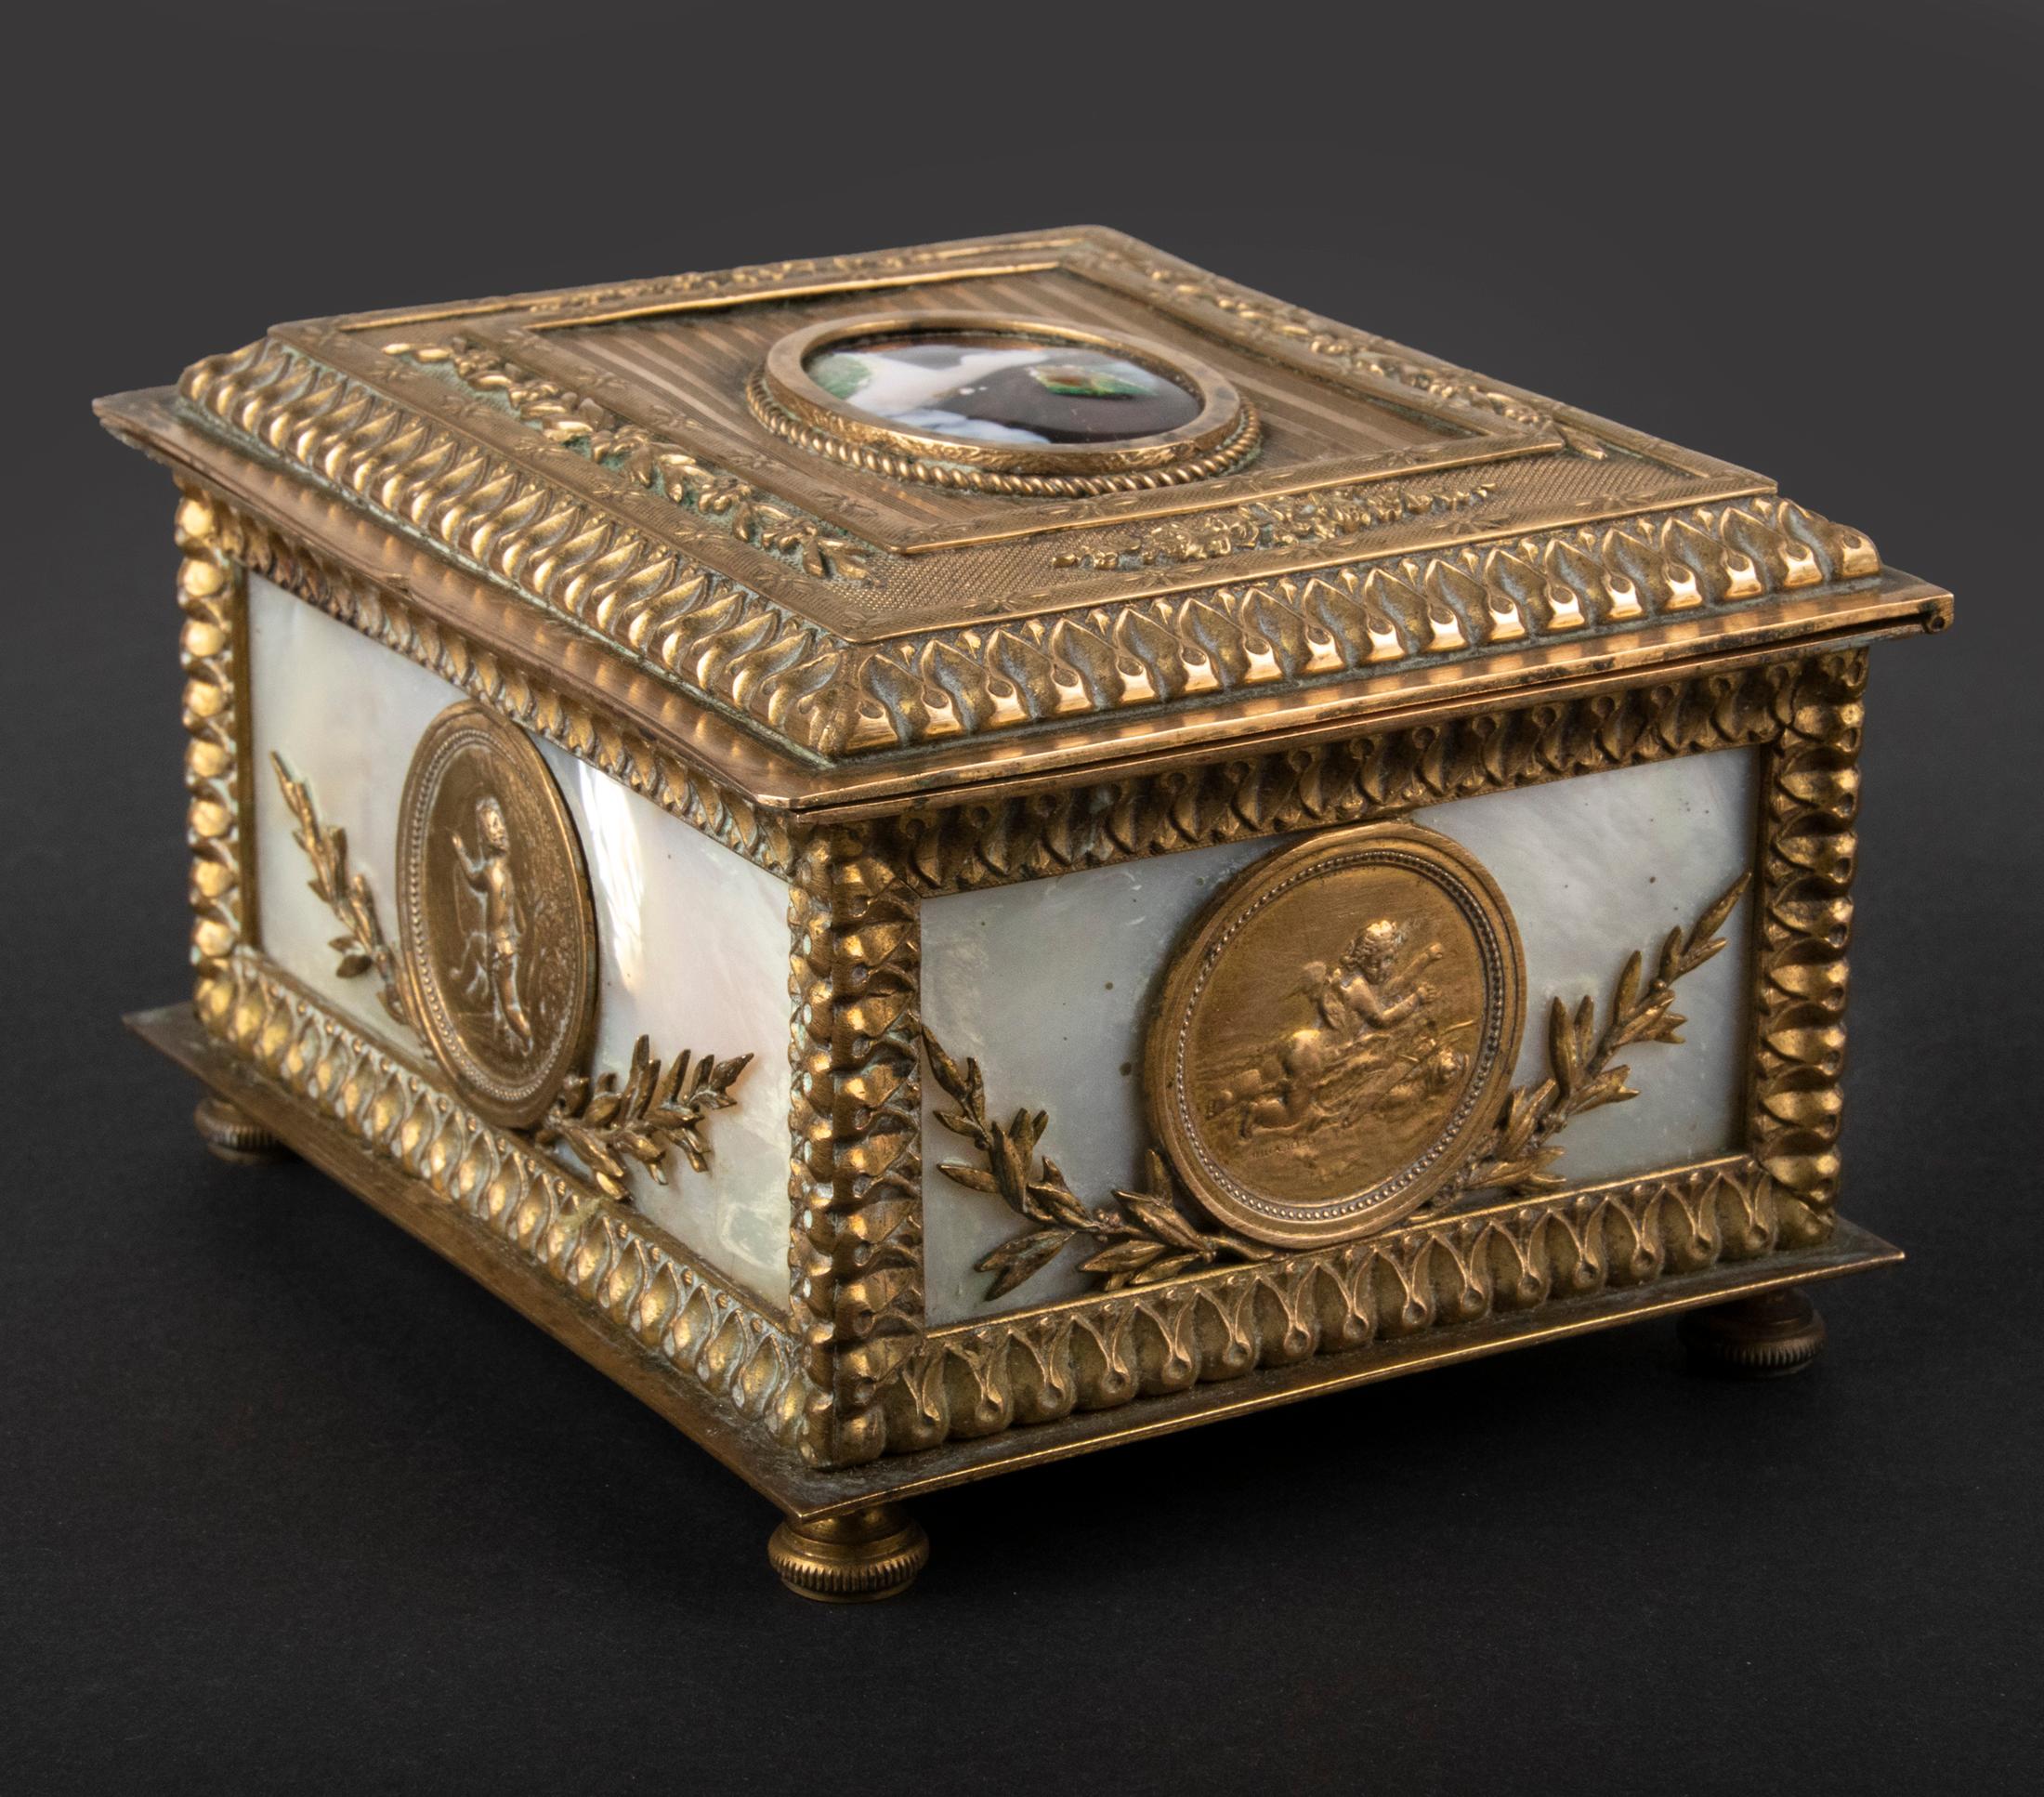 Cast 19th Century Jewelery Box by JP Legastelois, Bronze with Mother of Pearl